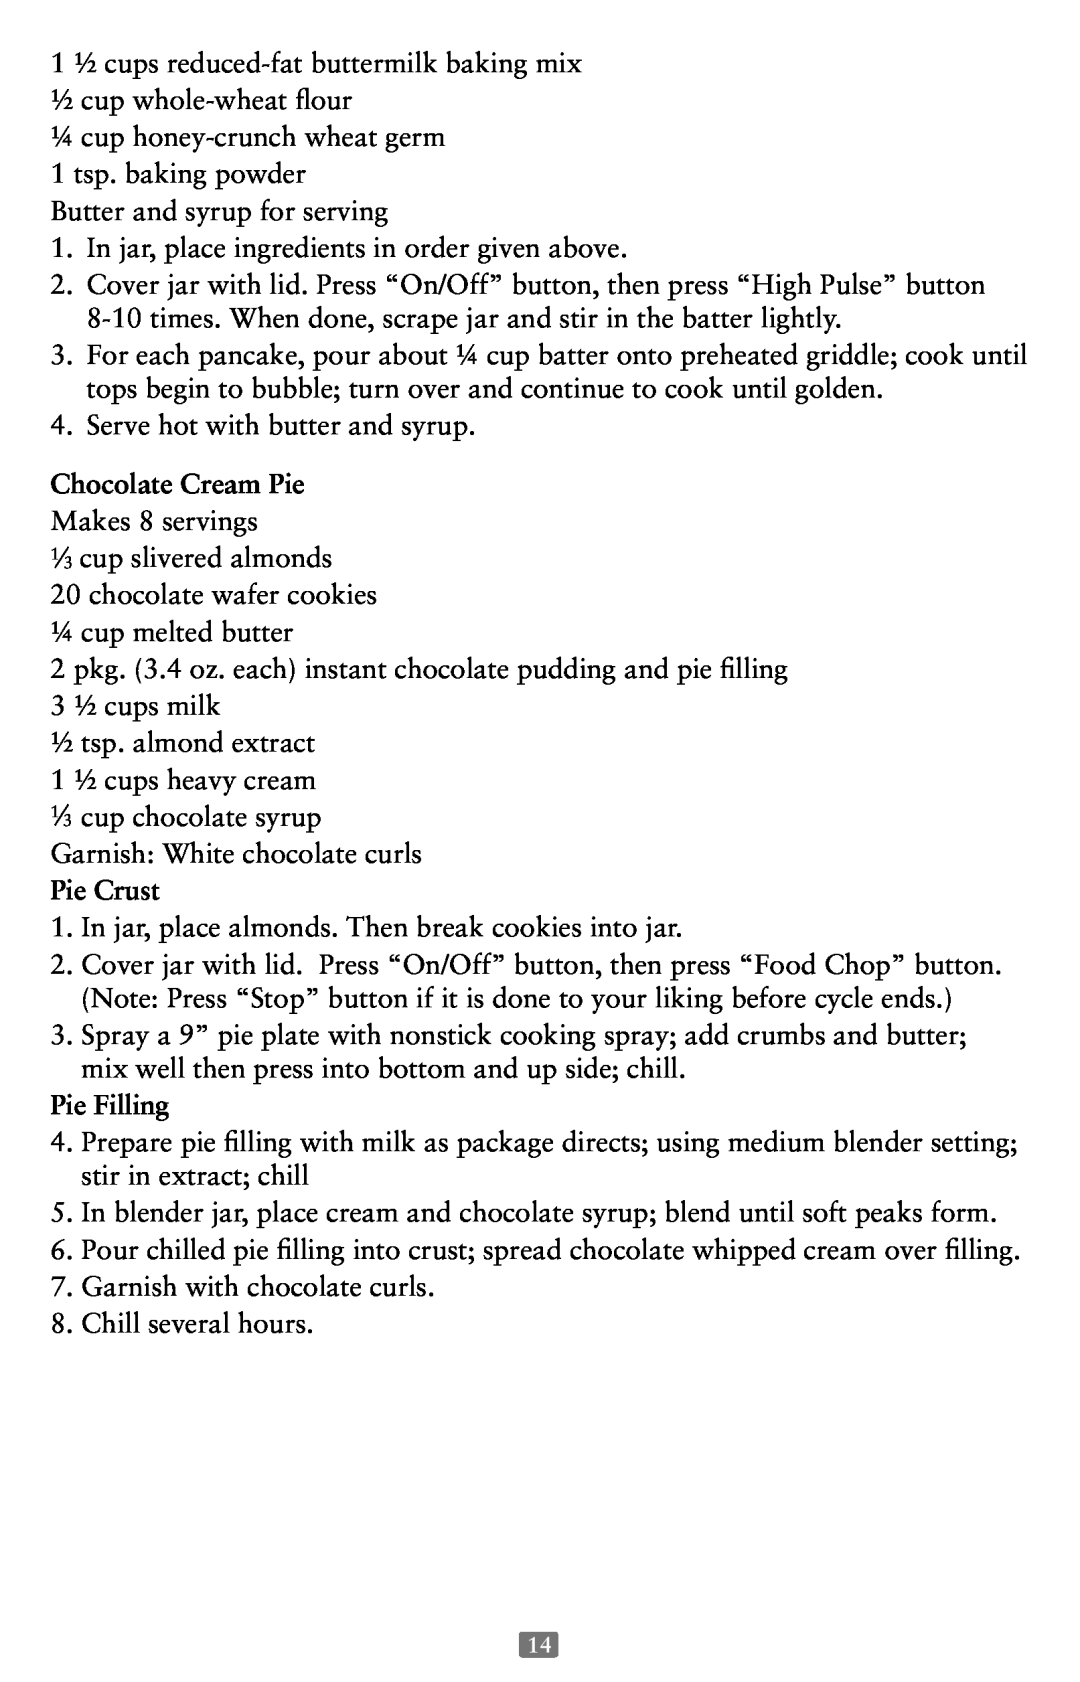 Oster 126477-001-000 instruction manual 1 3 cup chocolate syrup, Chocolate Cream Pie, Pie Crust, Pie Filling 